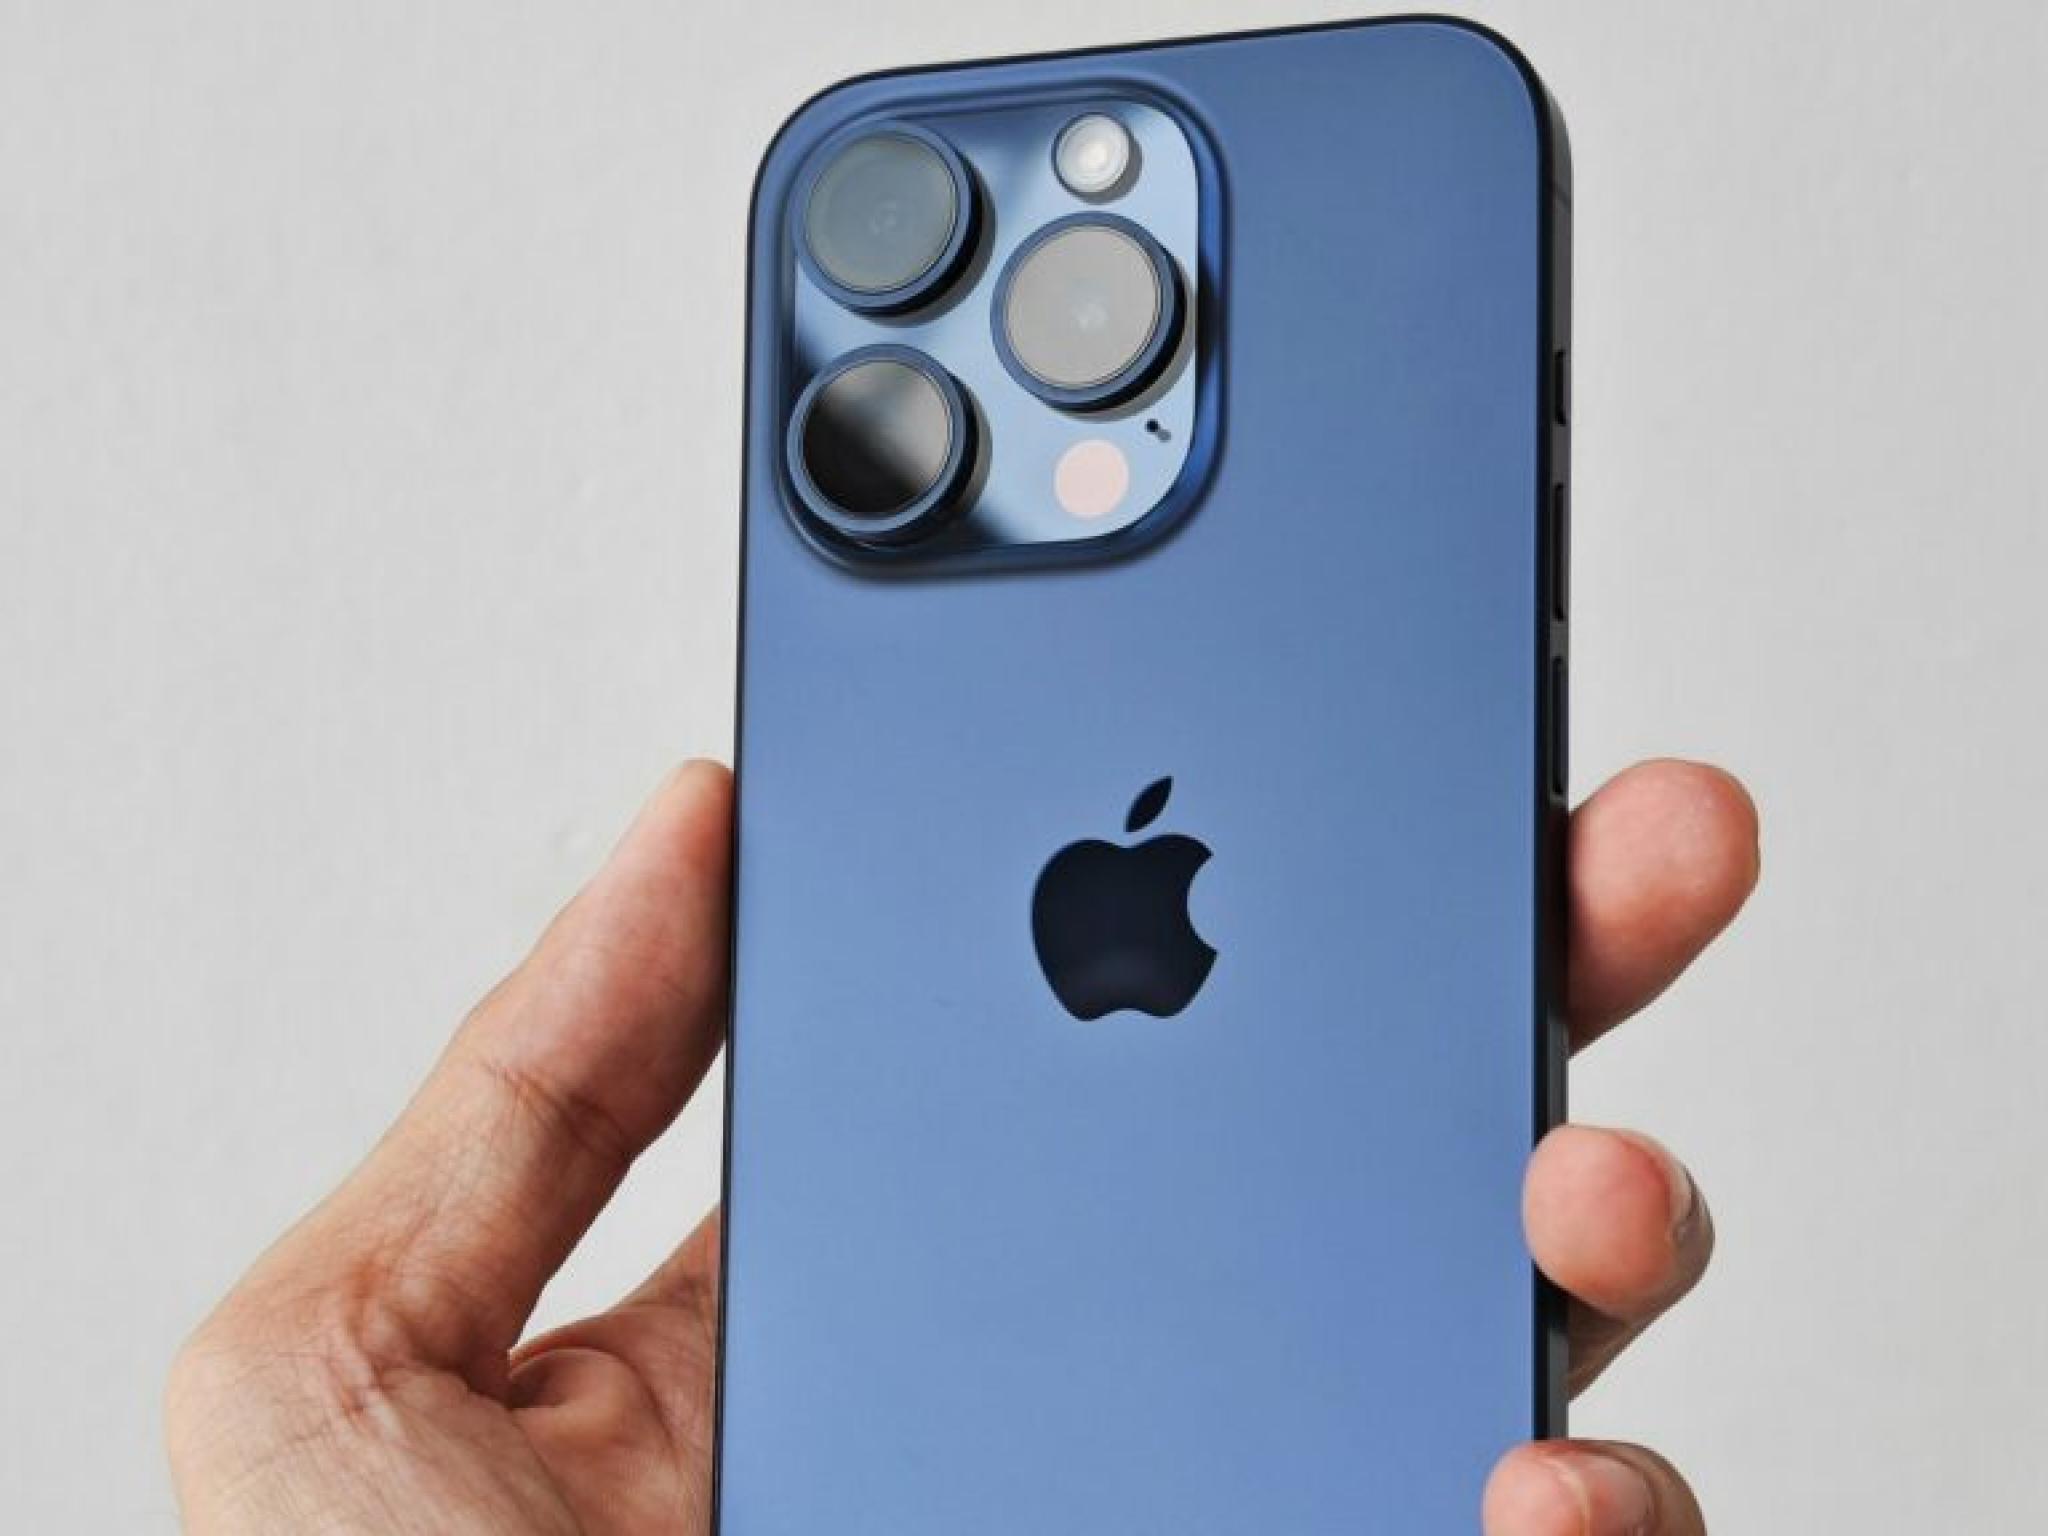  how-does-apple-put-the-iphone-through-rugged-testing-mkbhd-shares-inside-view-of-the-process--see-the-videos 